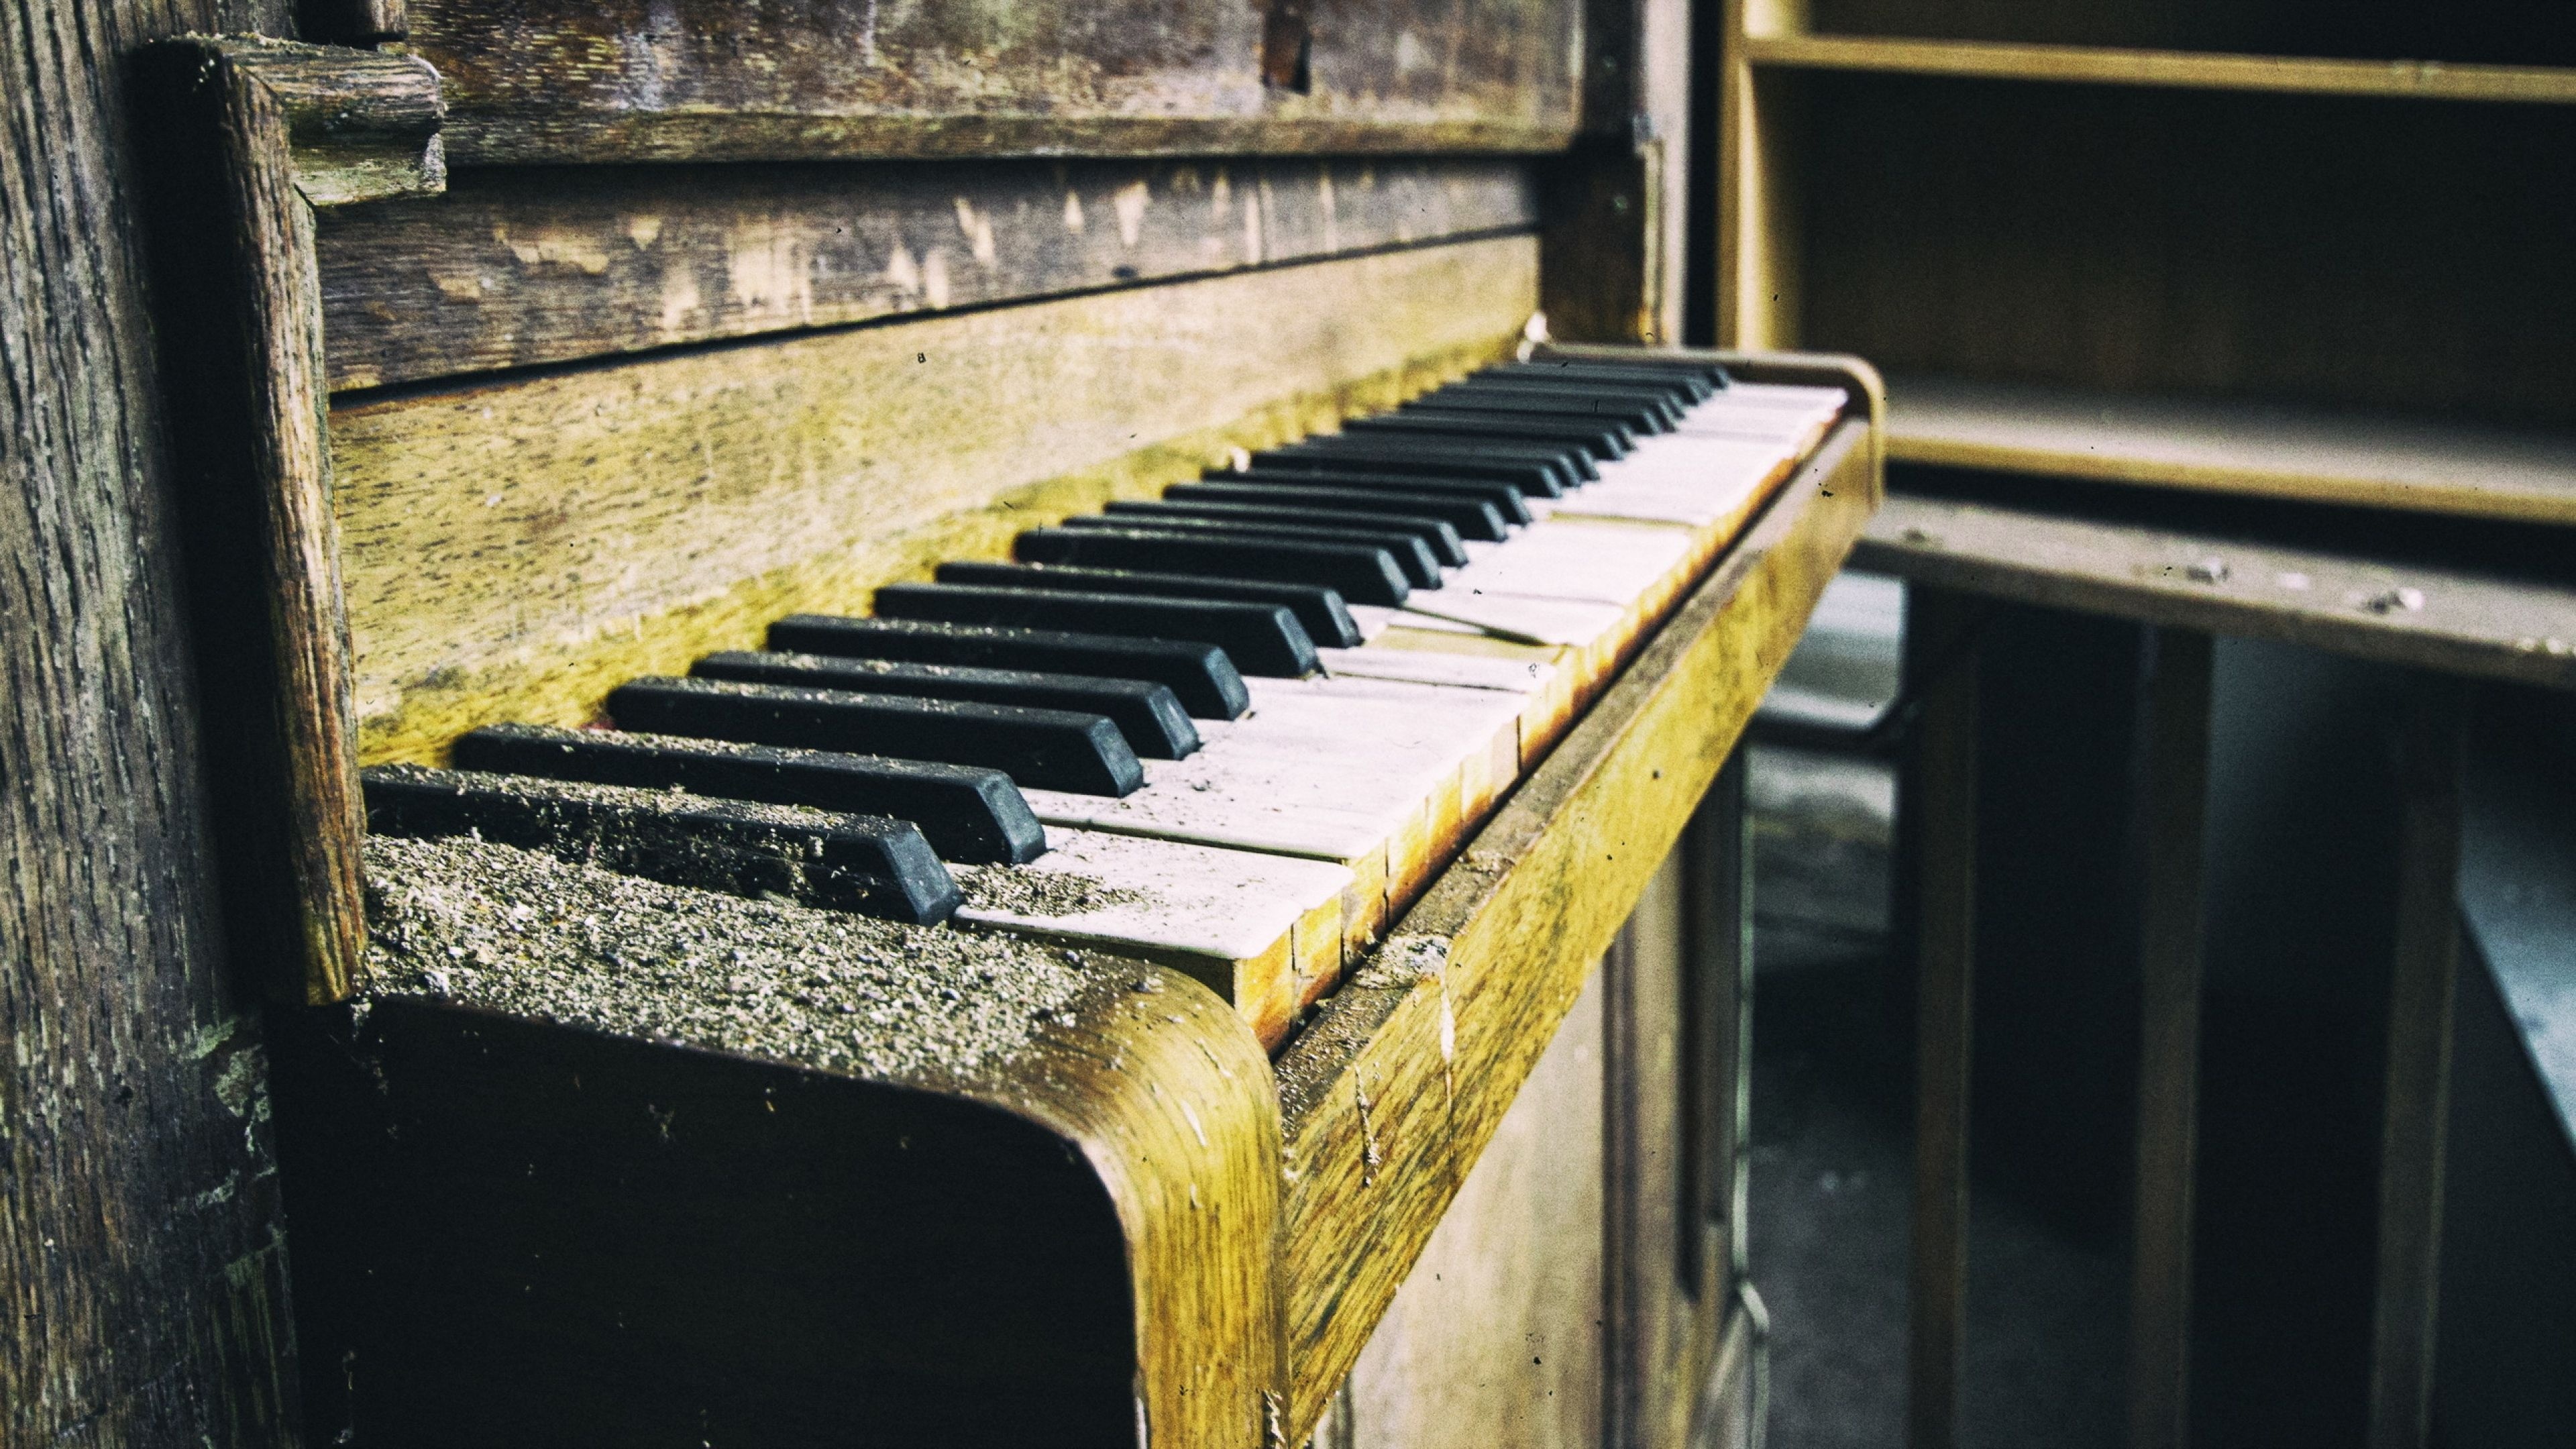 Piano: Upright Model, Invented In London In 1826, An Old Musical Instrument. 3840x2160 4K Background.